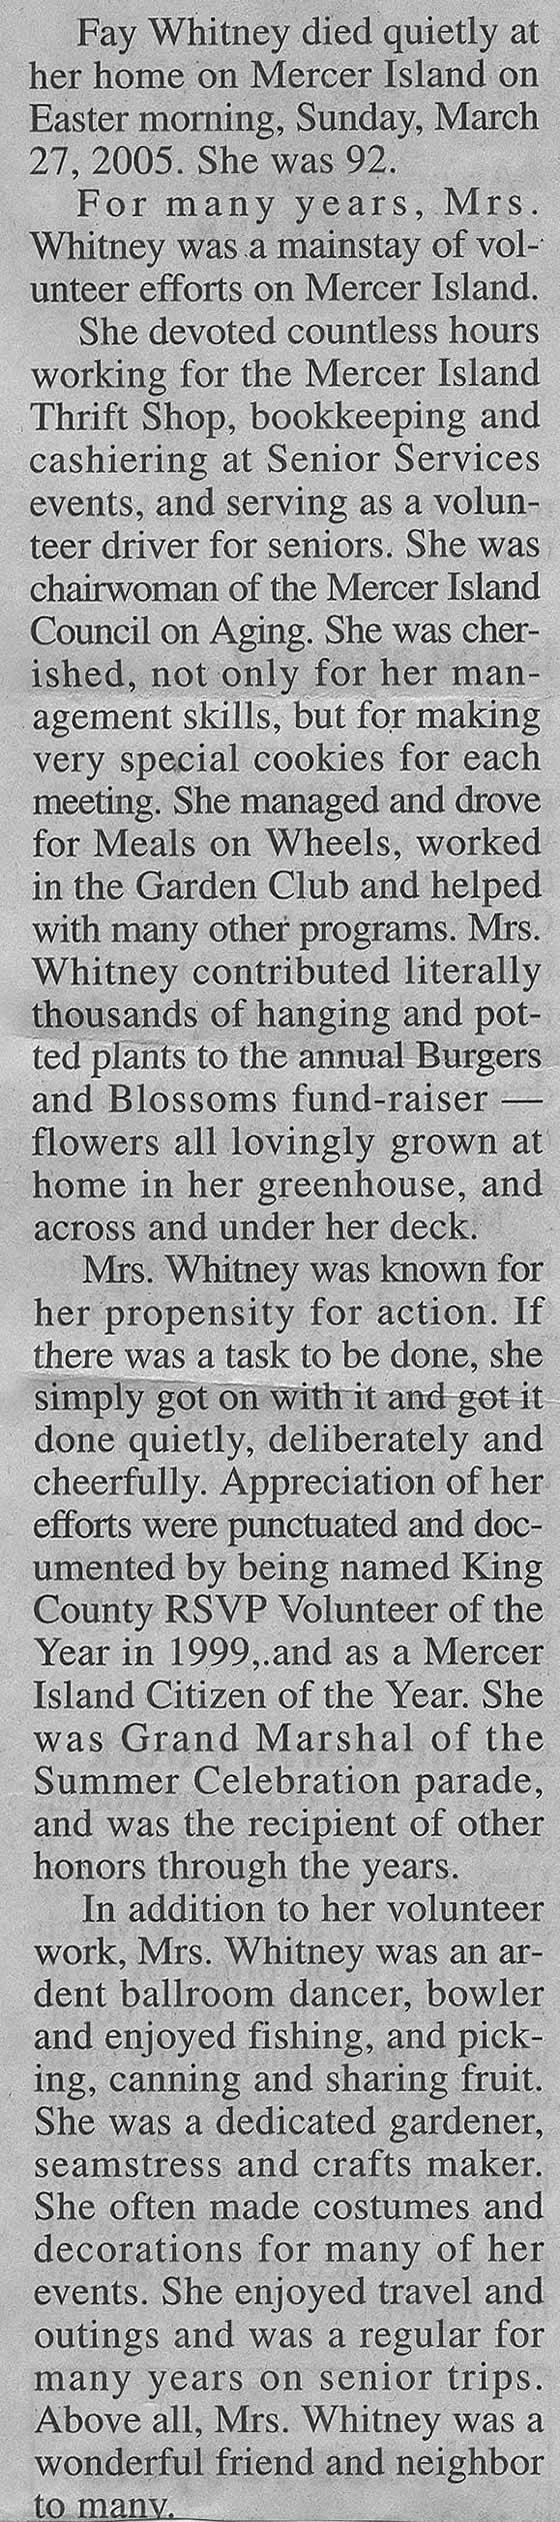 <Fay Whitney died quietly at her home on Mercer Island on Easter morning, Sunday, March 27, 2005. She was 92. For many years, Mrs. Whitney was a mainstay of volunteer efforts on Mercer Island. She devoted countless hours working for the Mercer Island Thrift Shop, bookkeeping and cashiering at Senior Services events, and serving as a volunteer driver for seniors. She was chairwoman for the Mercer Island council on aging. She was cherished, not only for her management skills, but for making very special cookies for each meeting. She managed and for meals on wheels, worked in the garden club and helped with many other programs. Mrs. Whitney contributed literally thousands of hanging and potted plants to the annual Burgers and Blossoms fund raiser flowers all lovingly grown at home in her greenhouse, and across and under her deck. Mrs. Whitney was known for her propensity for action. If there was a task to be done, she simply got on with it and got it done quietly, deliberately and cheerfully. Appreciation of her efforts were punctuated and documented by being named King County RSVP Volunteer of the Year in 1999, and as a Mercer Island Citizen of the Year. She was grand marshal of the summer celebration parade, and was the recipient of other honors through the years. In addition to her volunteer work, Mrs. Whitney was an ardent ballroom dancer, bowler and enjoyed fishing, and picking, canning and sharing fruit. She was a dedicated Gardner seamstress and crafts maker. She often made costumes and decorations for many of her events. She enjoyed travel and outings and was a regular for many years on senior trips. Above all, Mrs. Whitney was a wonderful friend and neighbor to many. Mrs. Whitney lived on Mercer Island since 1956, when she and her husband Edwin (Sam) built a home, moving here from West Seattle. Mr. Whitney wan an engineer at The Bowing Co. He retired in 1964 and died in 1968. Mrs. Whitney worked at Continental Can Company until her retirement in 1978. After retirement, she continued to stay in close touch with many friends from the company. Mrs. Whitney was born on March 2, 1913, in New Mexico, one of five children of Connie and Cass Hester. She is survived by a brother, Adron (Bill) Hester, of Okanogan, and a sister Bonnie Ford, of Clovis, California; She also has many nieces, nephews, and their children. >